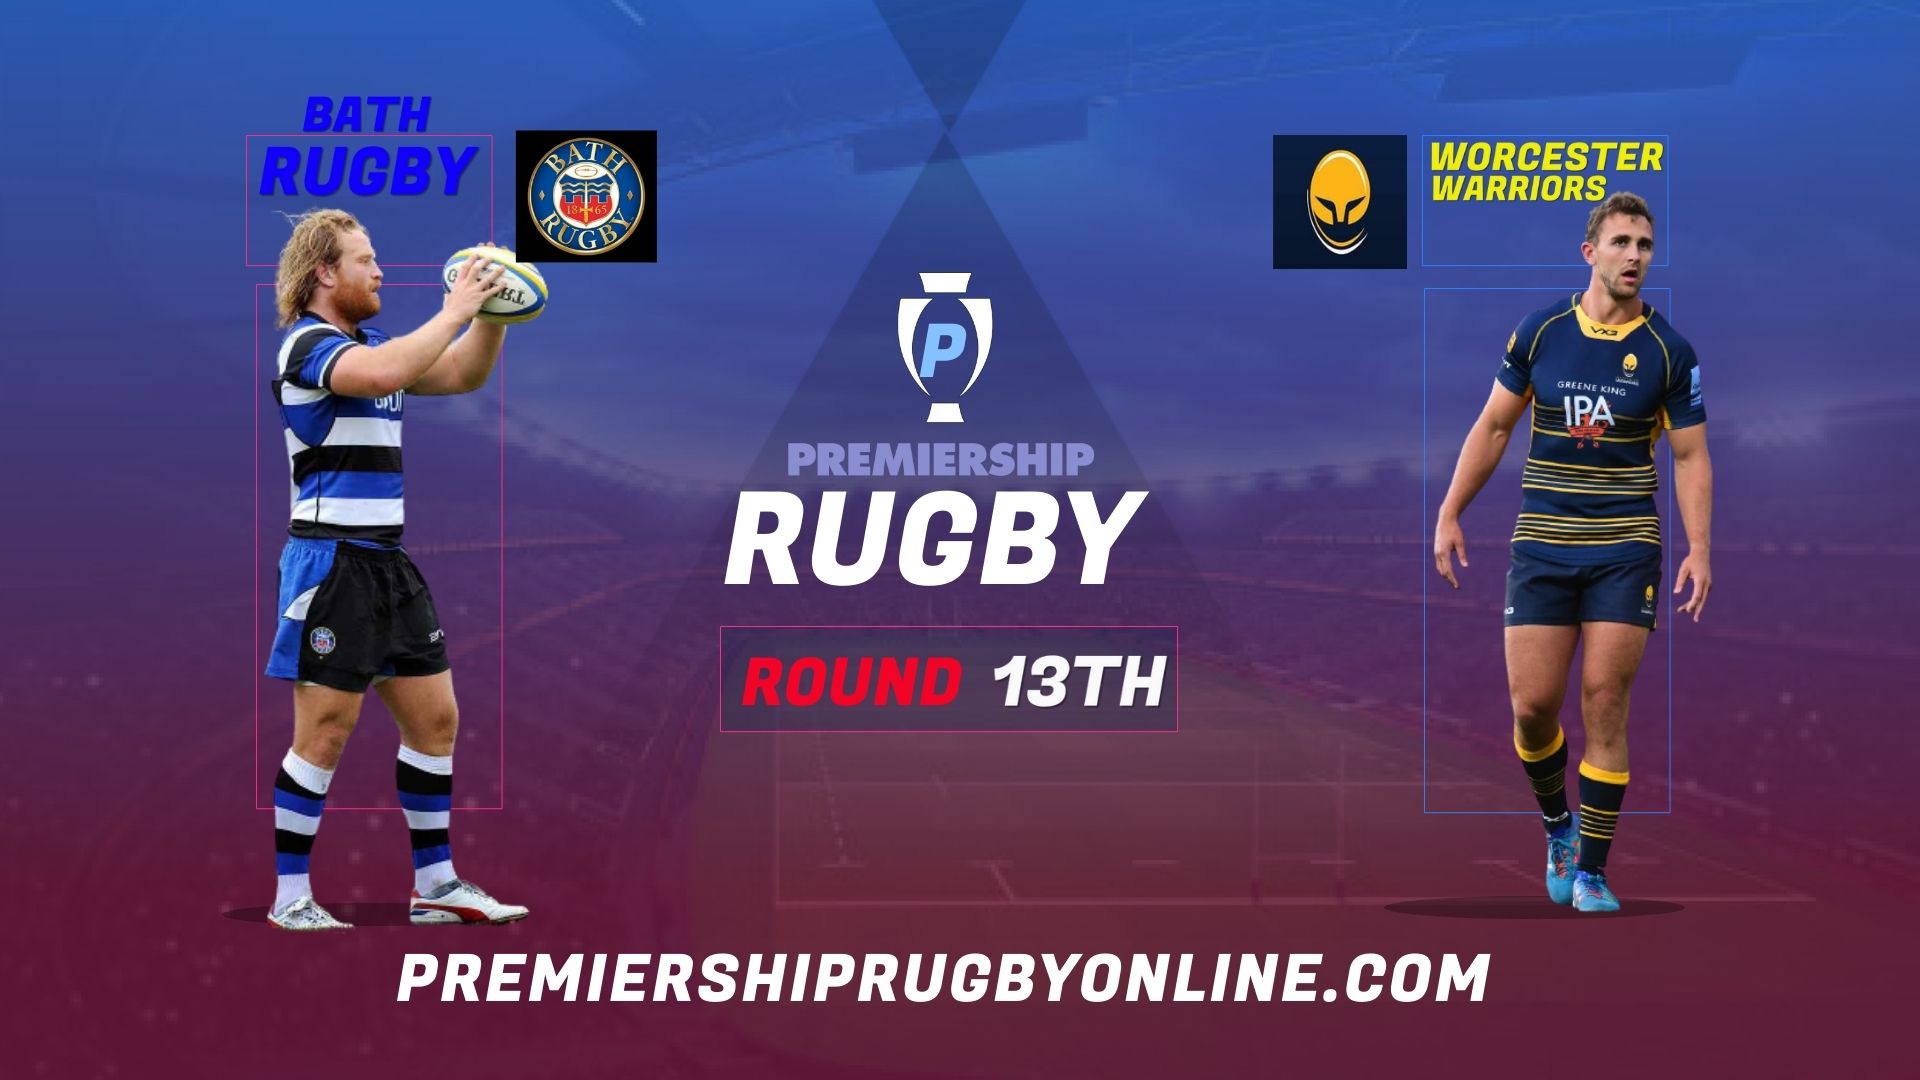 worcester-warriors-vs-bath-rugby-live-stream